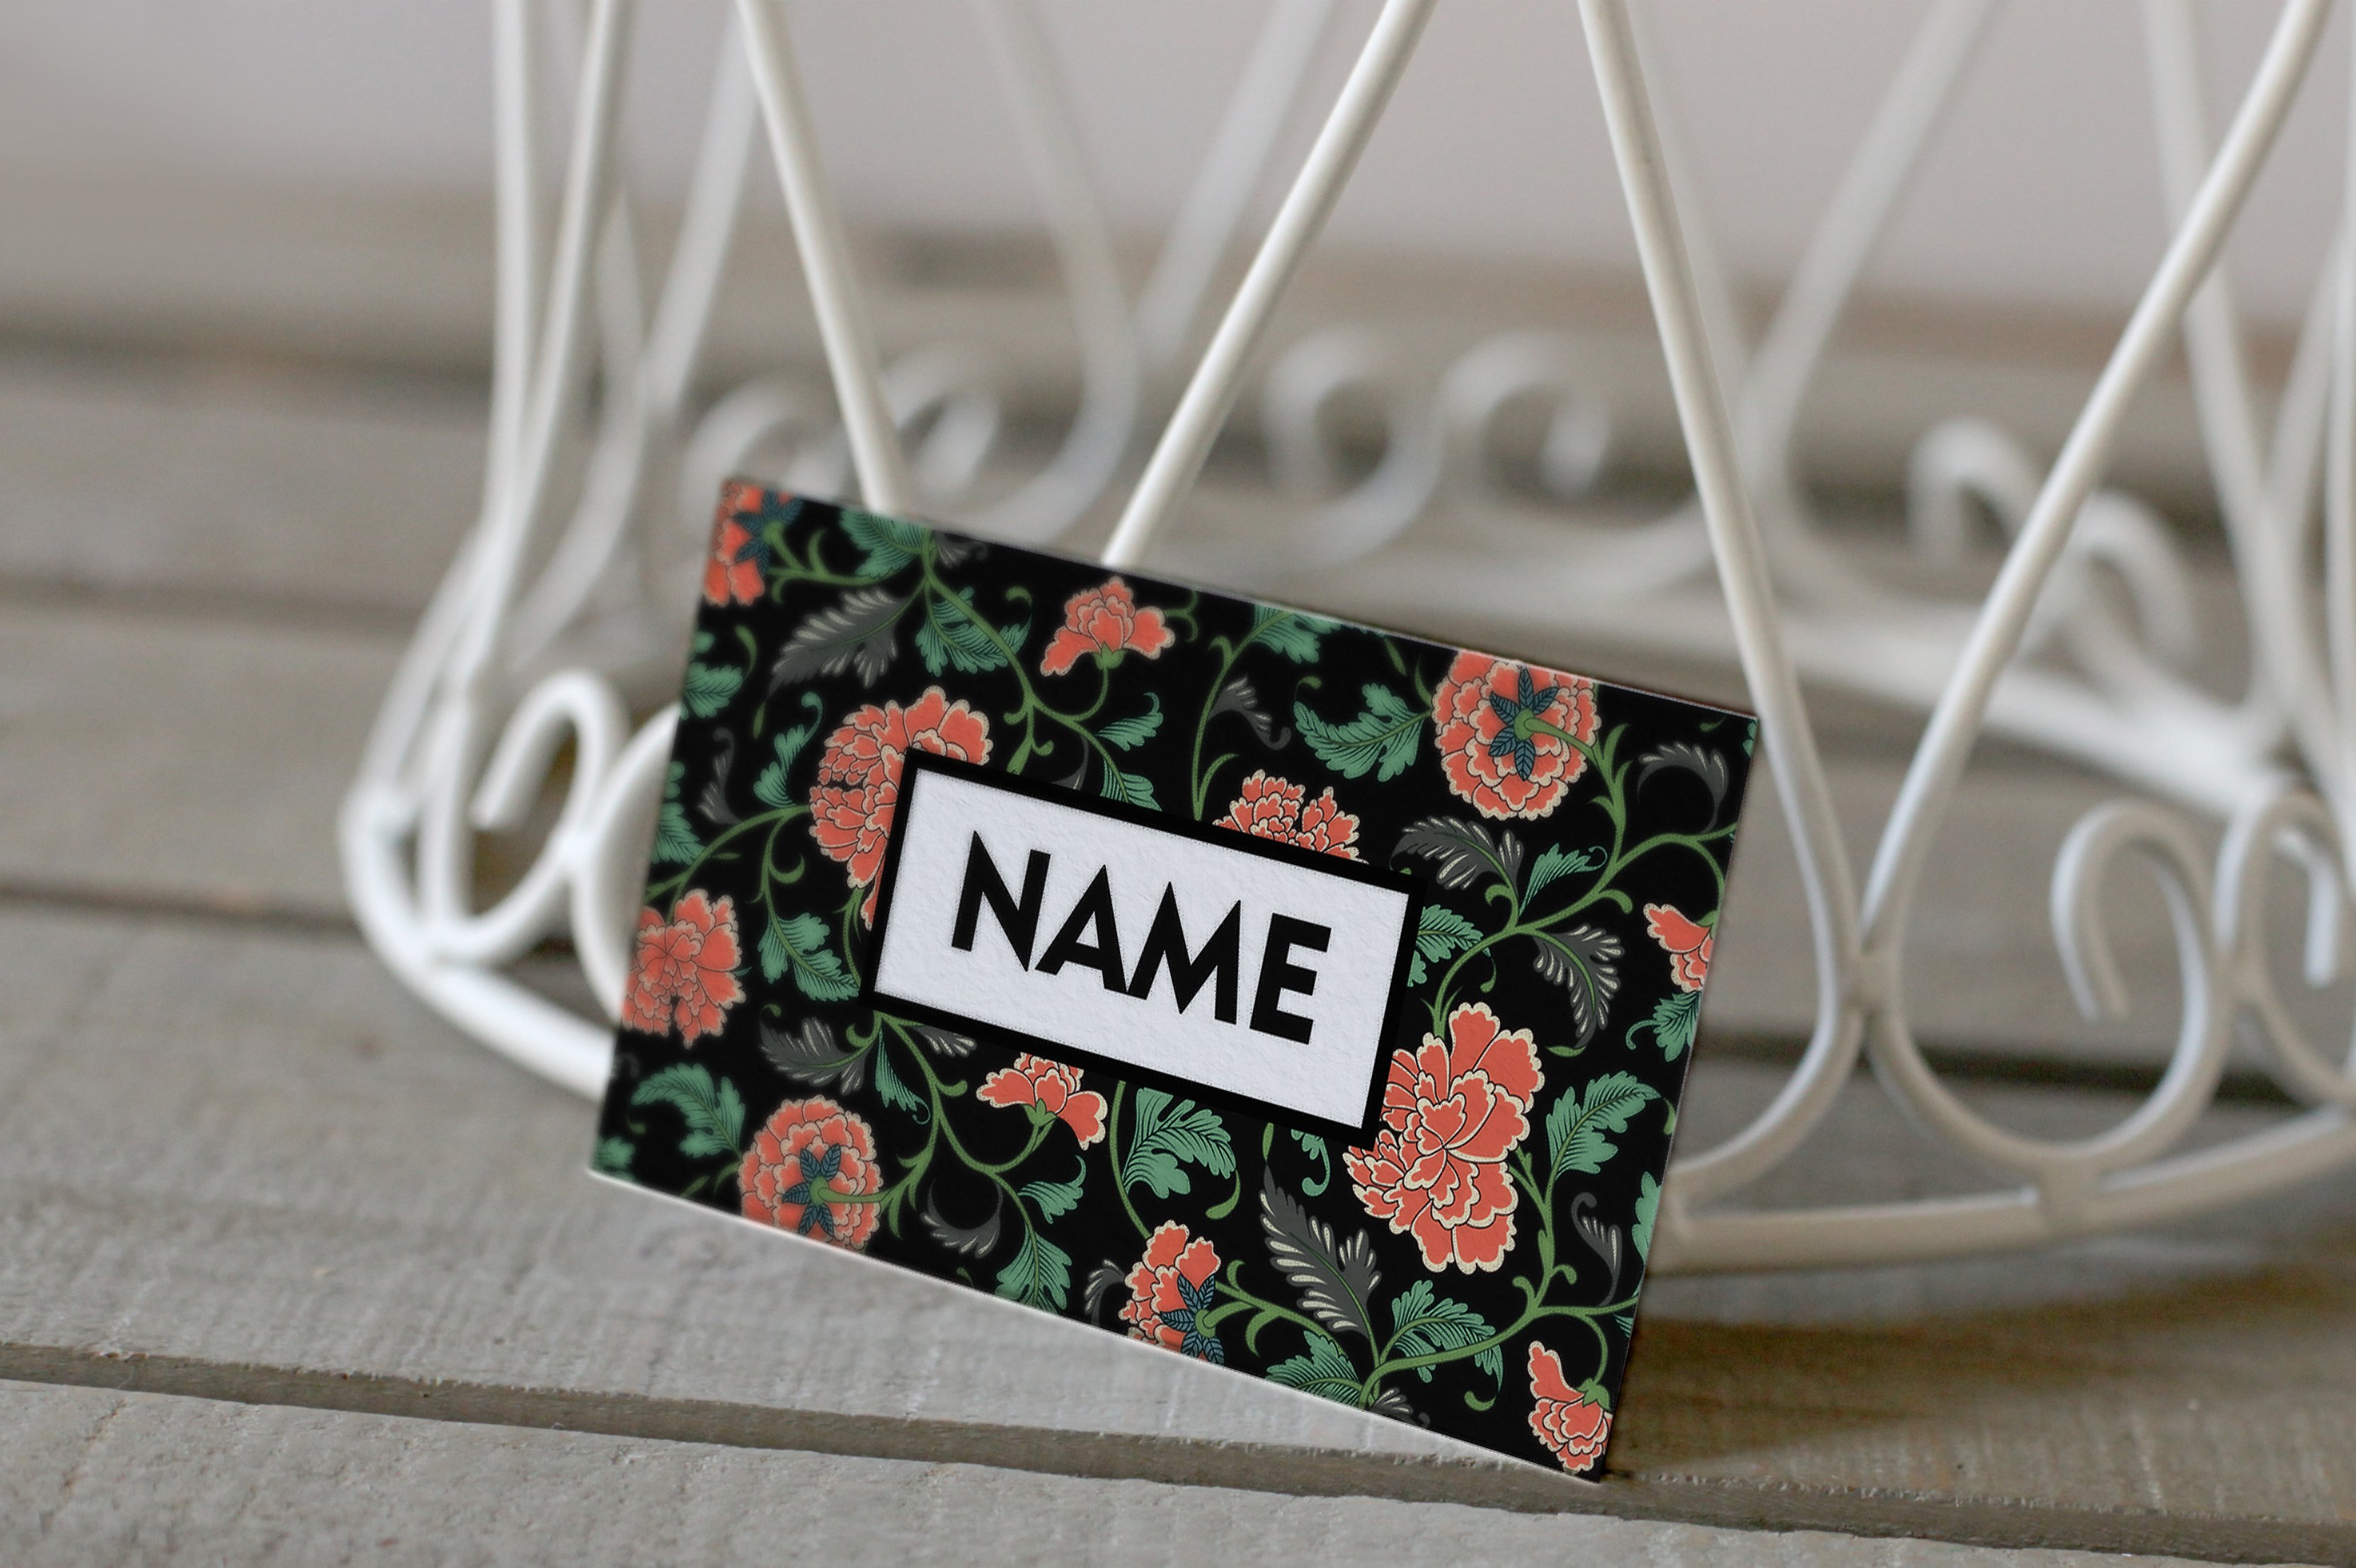 A name tag attached to a white wire holder.